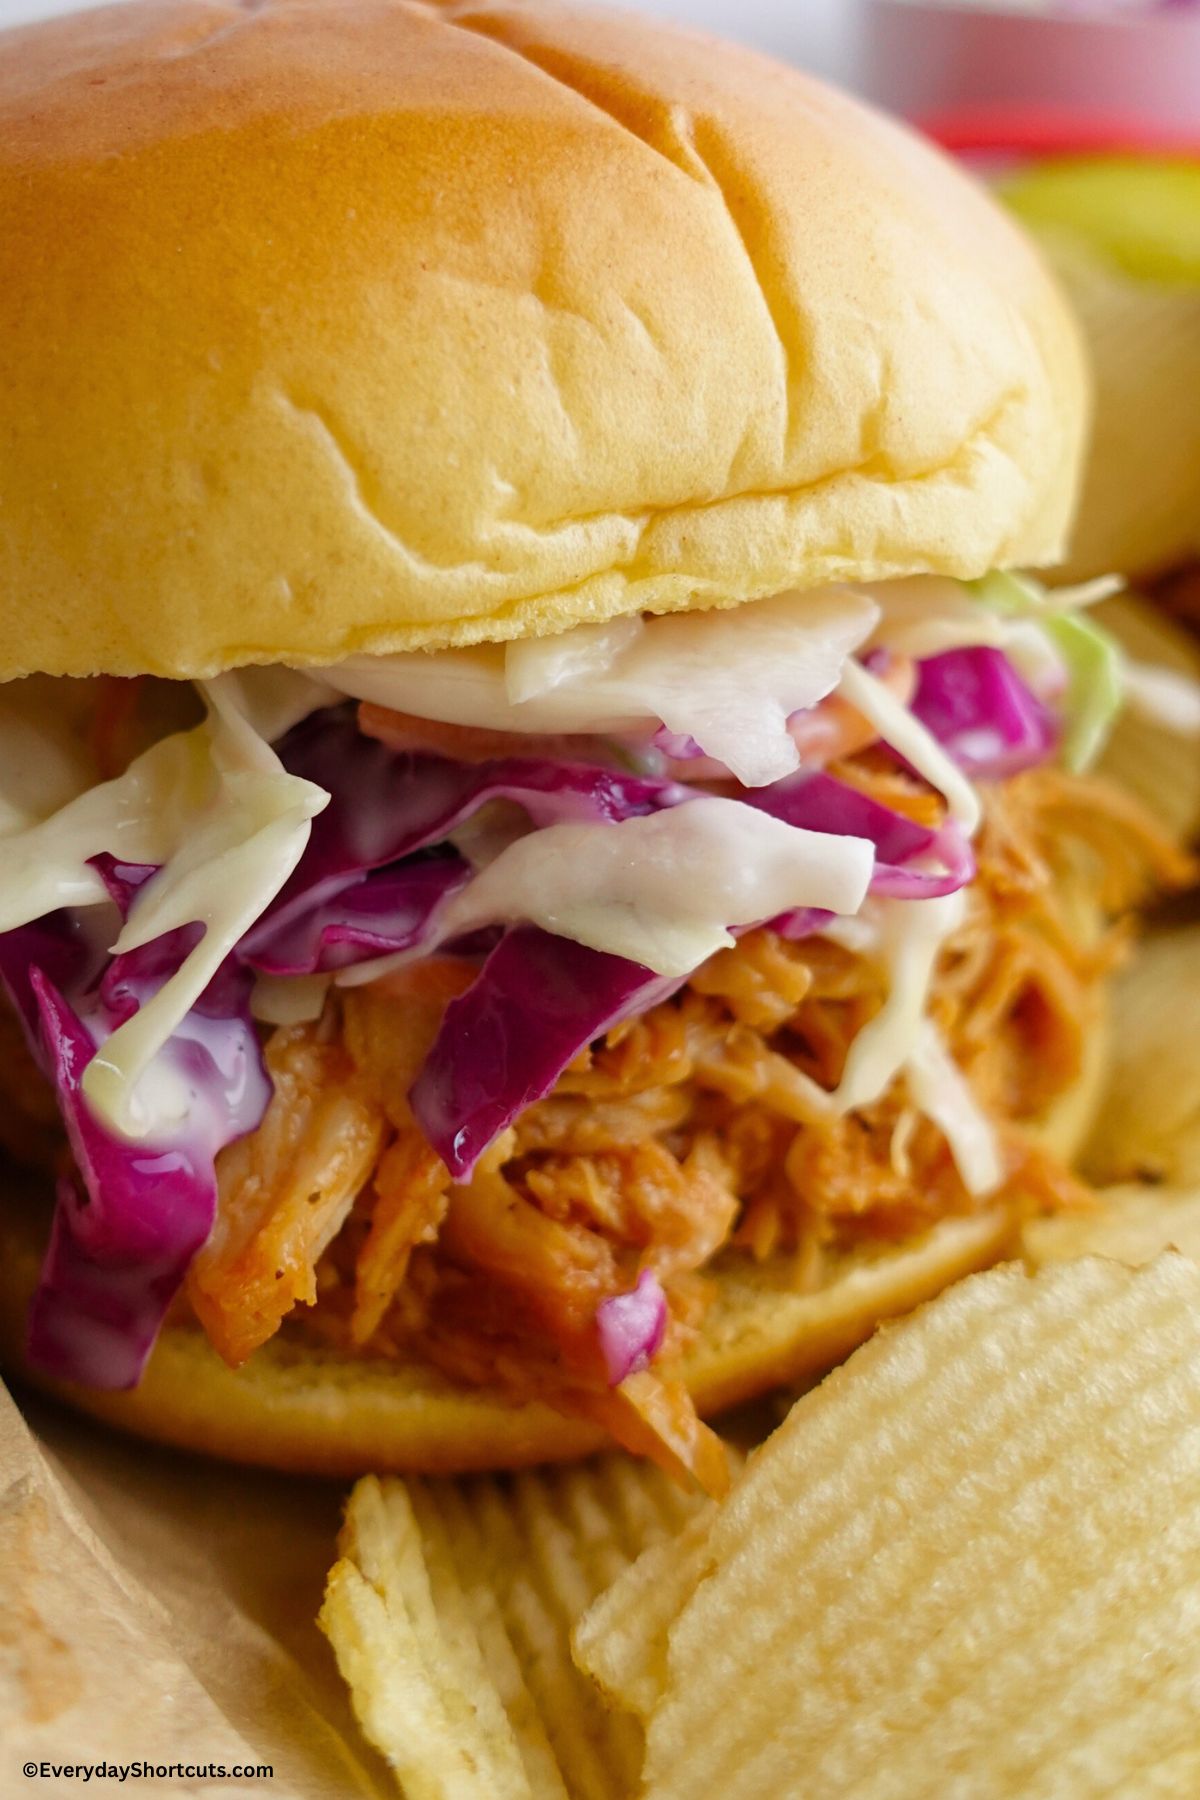 coleslaw and pulled chicken on a bun